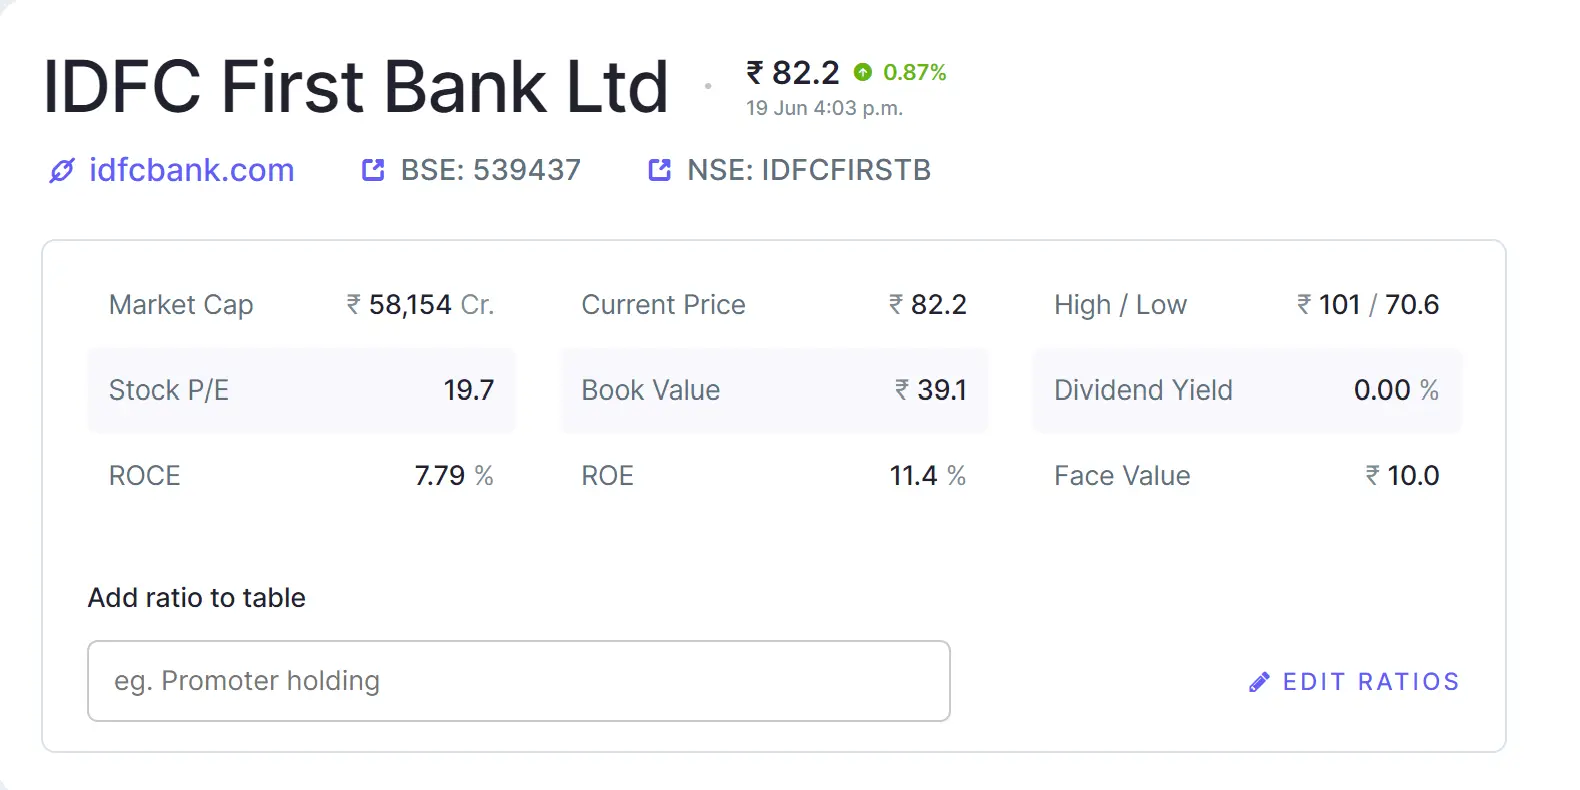 IDFC First Bank Share Price Target 2024, 2025, 2027, 2030, 2035